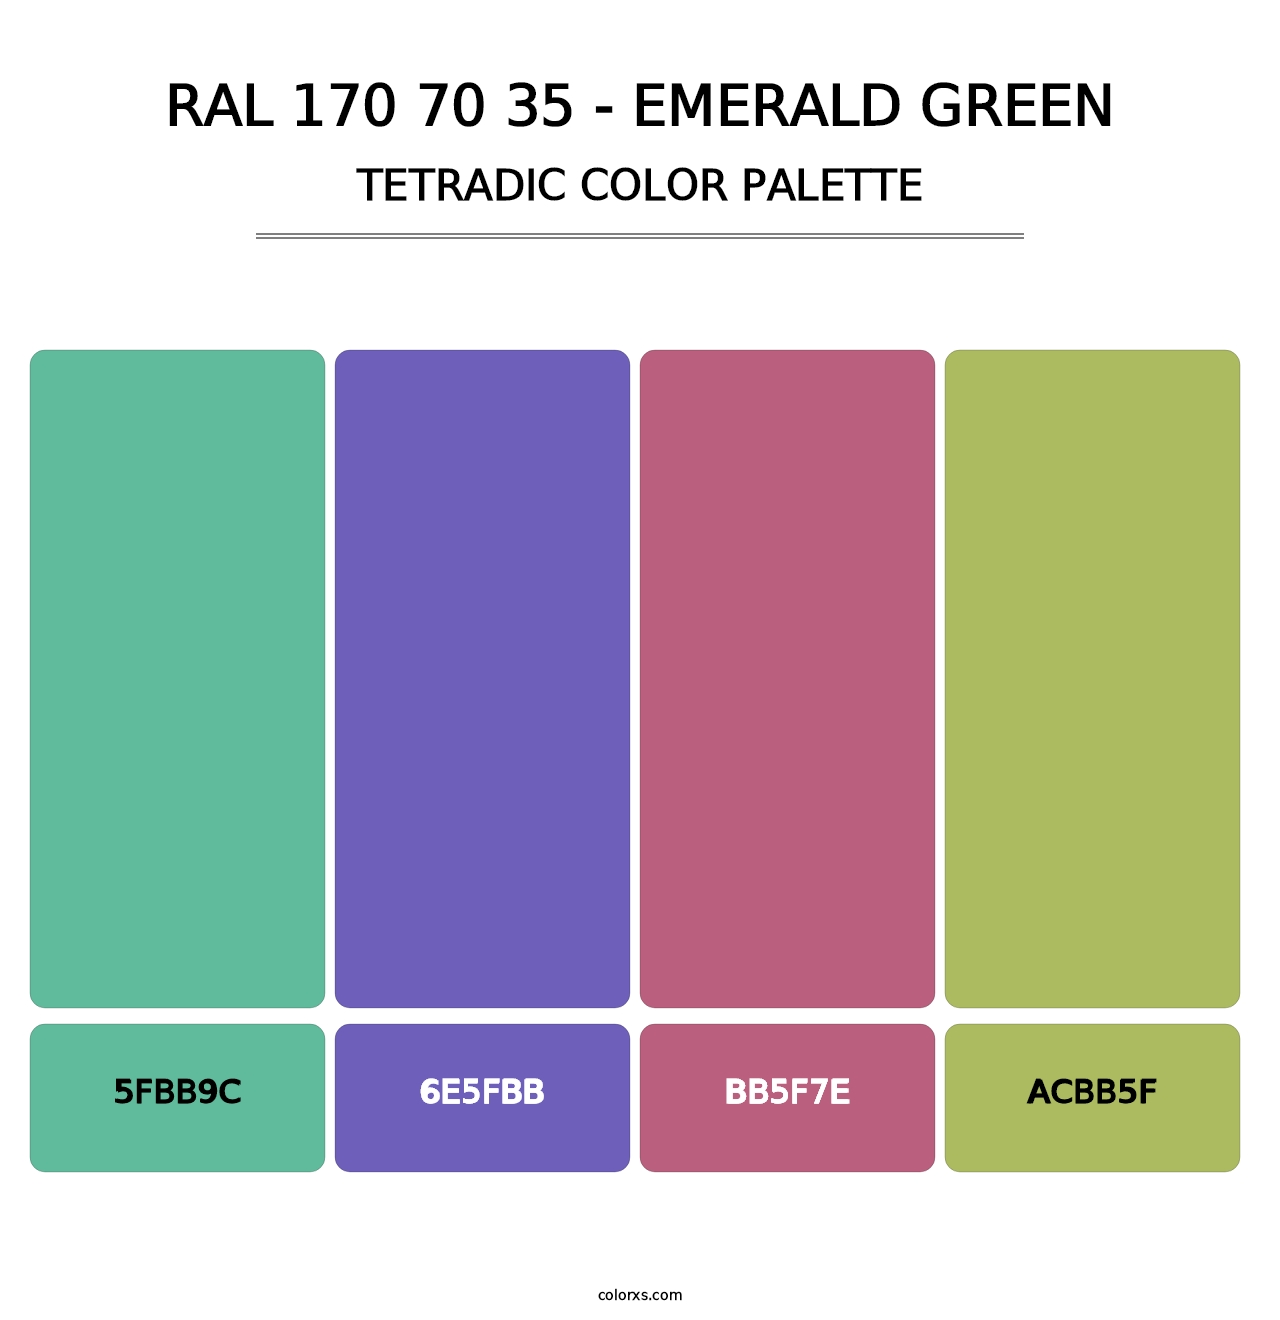 RAL 170 70 35 - Emerald Green - Tetradic Color Palette